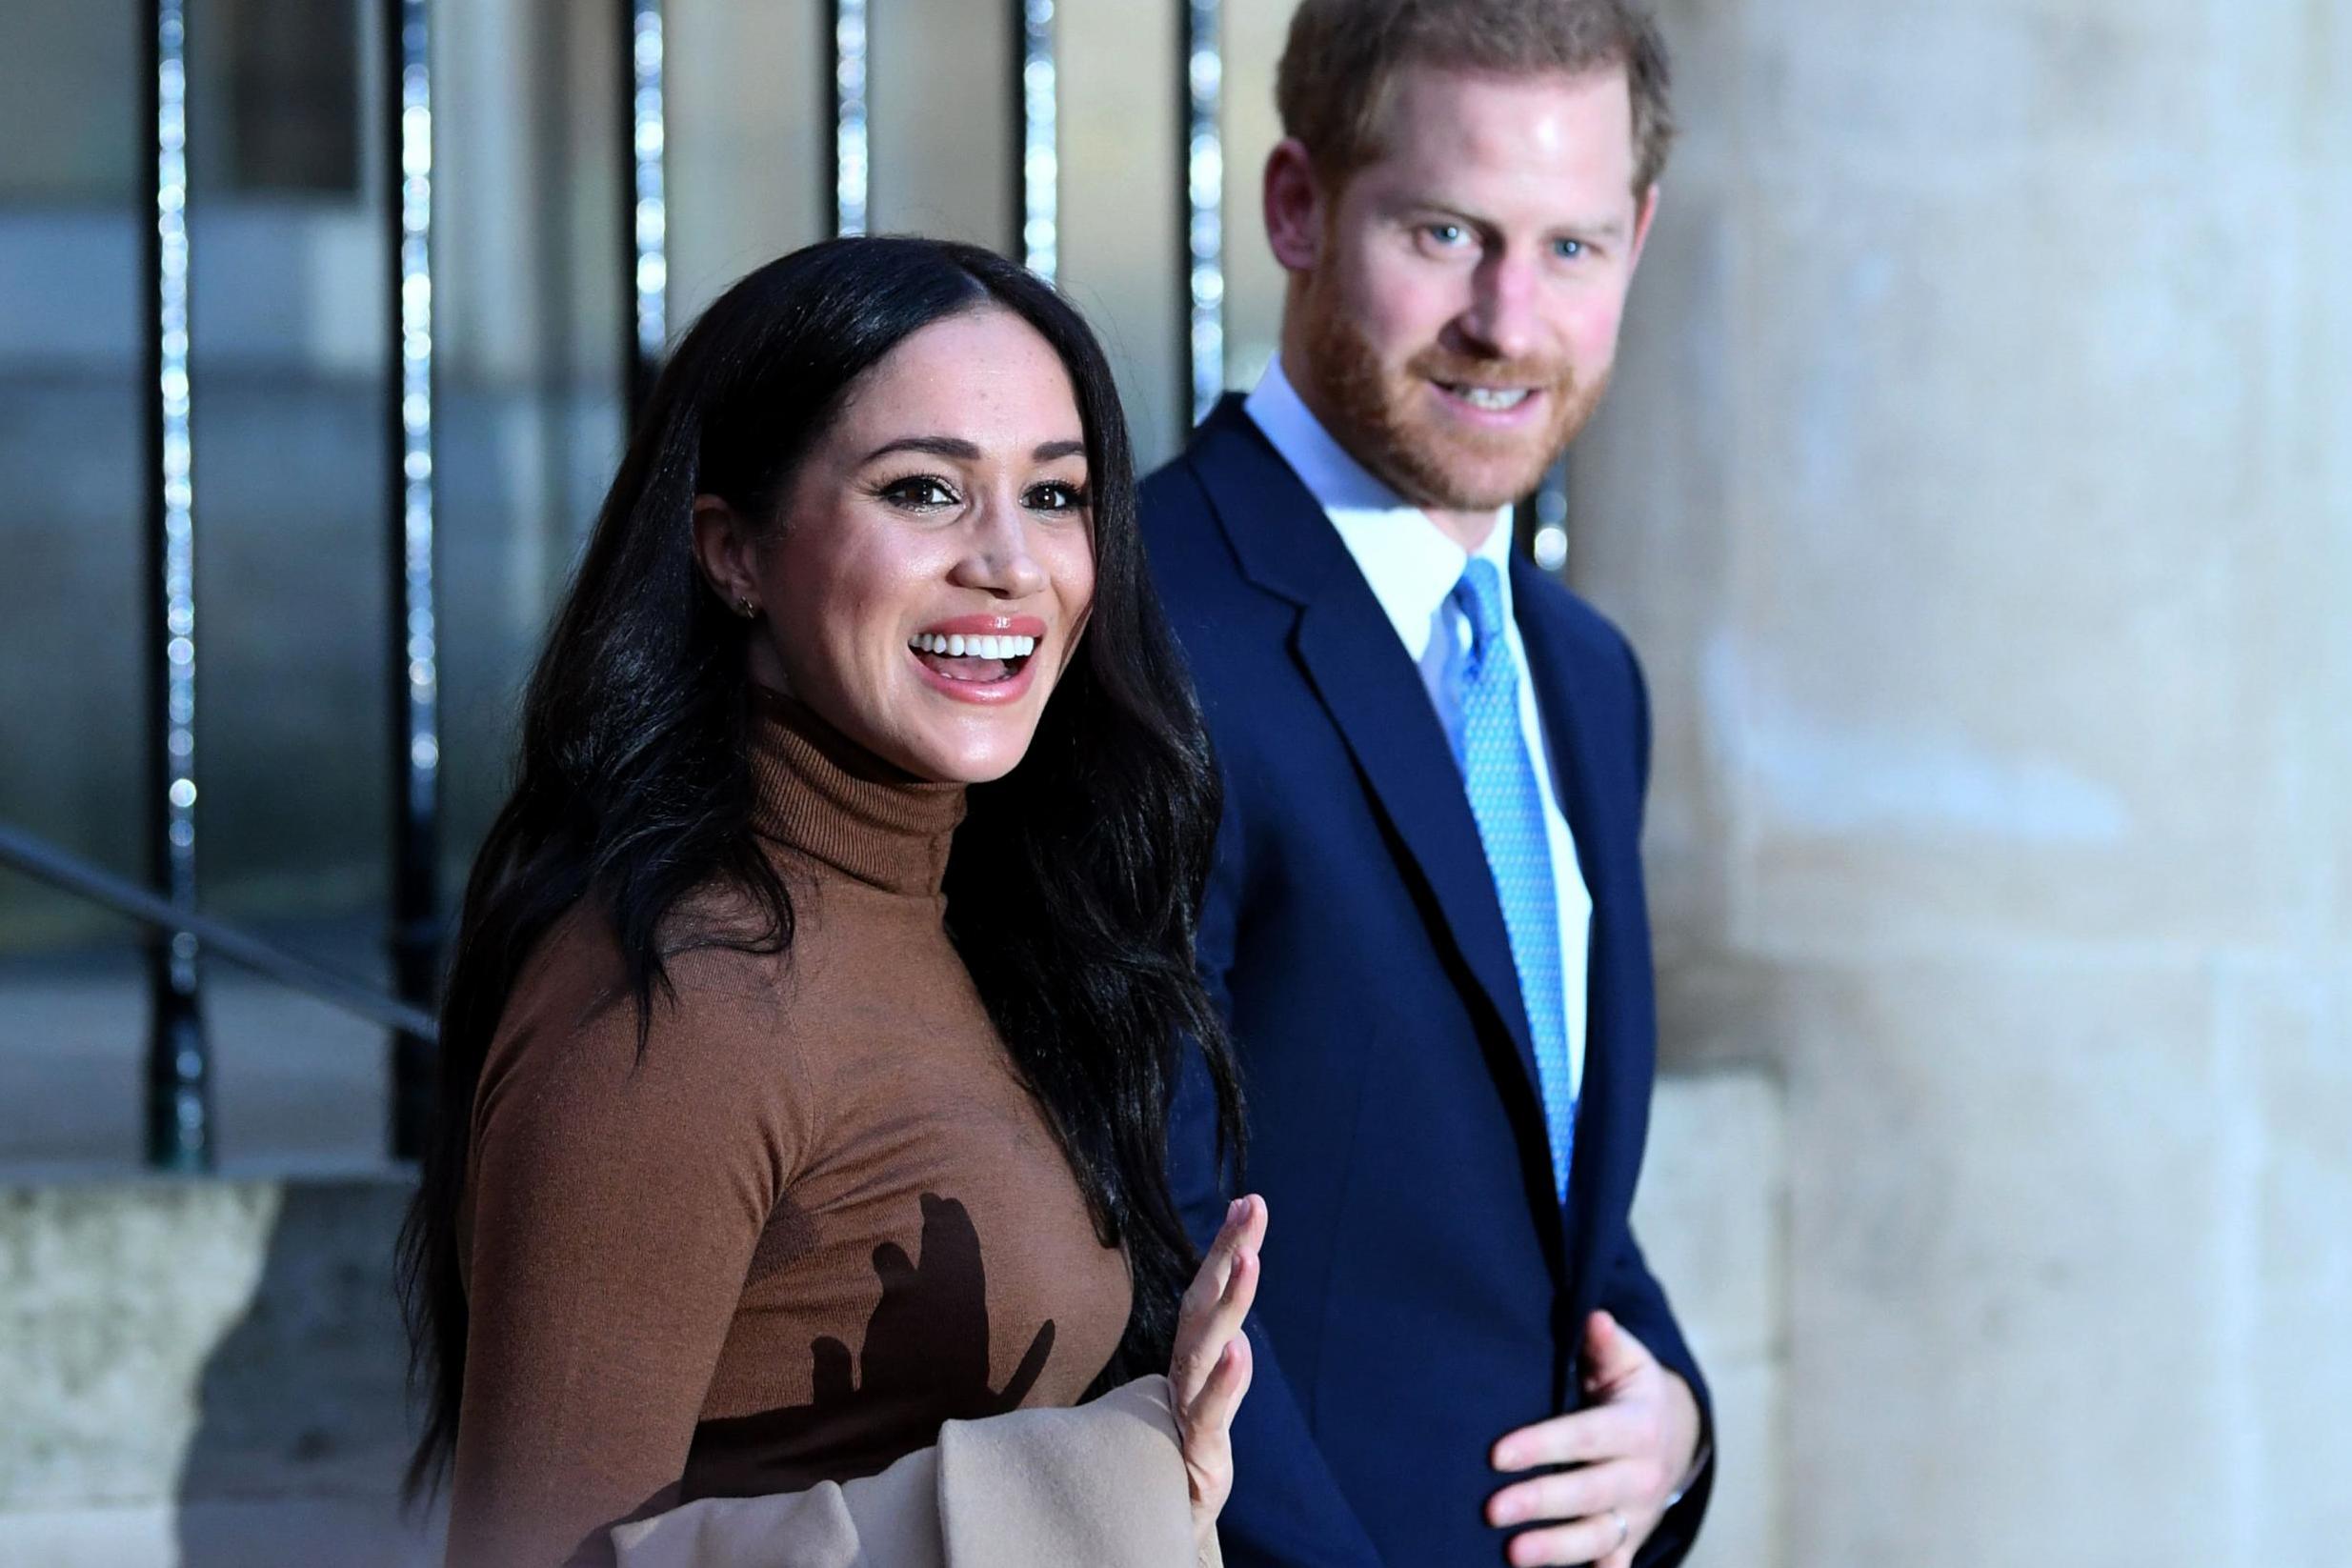 Prince Harry and Meghan Markle: How a 2014 play foreshadowed Duke of Sussex's decision to quit royal duties